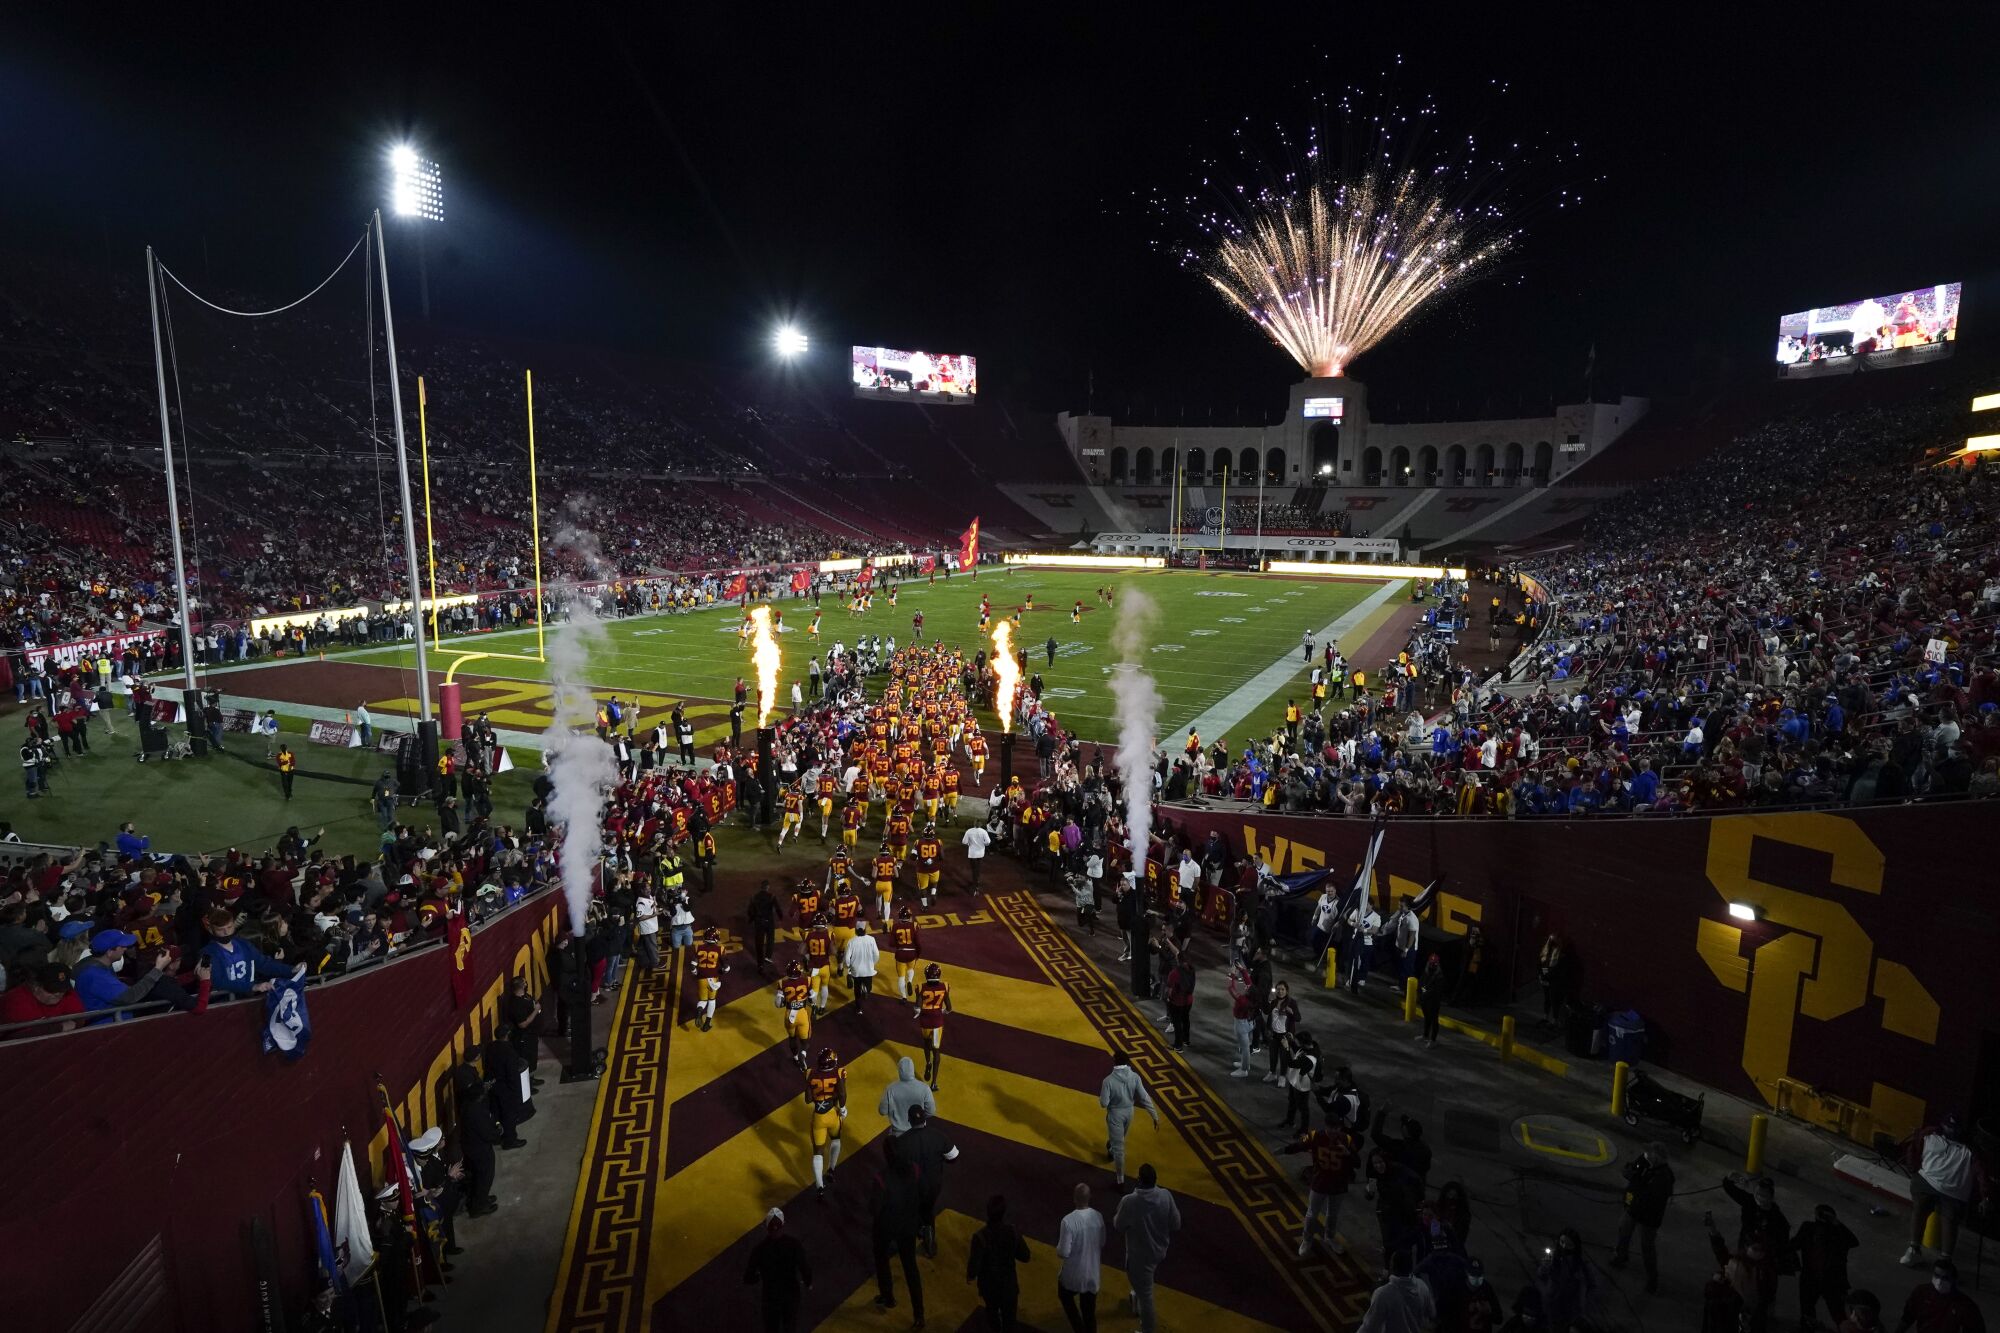 USC football players enter the field before a game against BYU at the Coliseum.